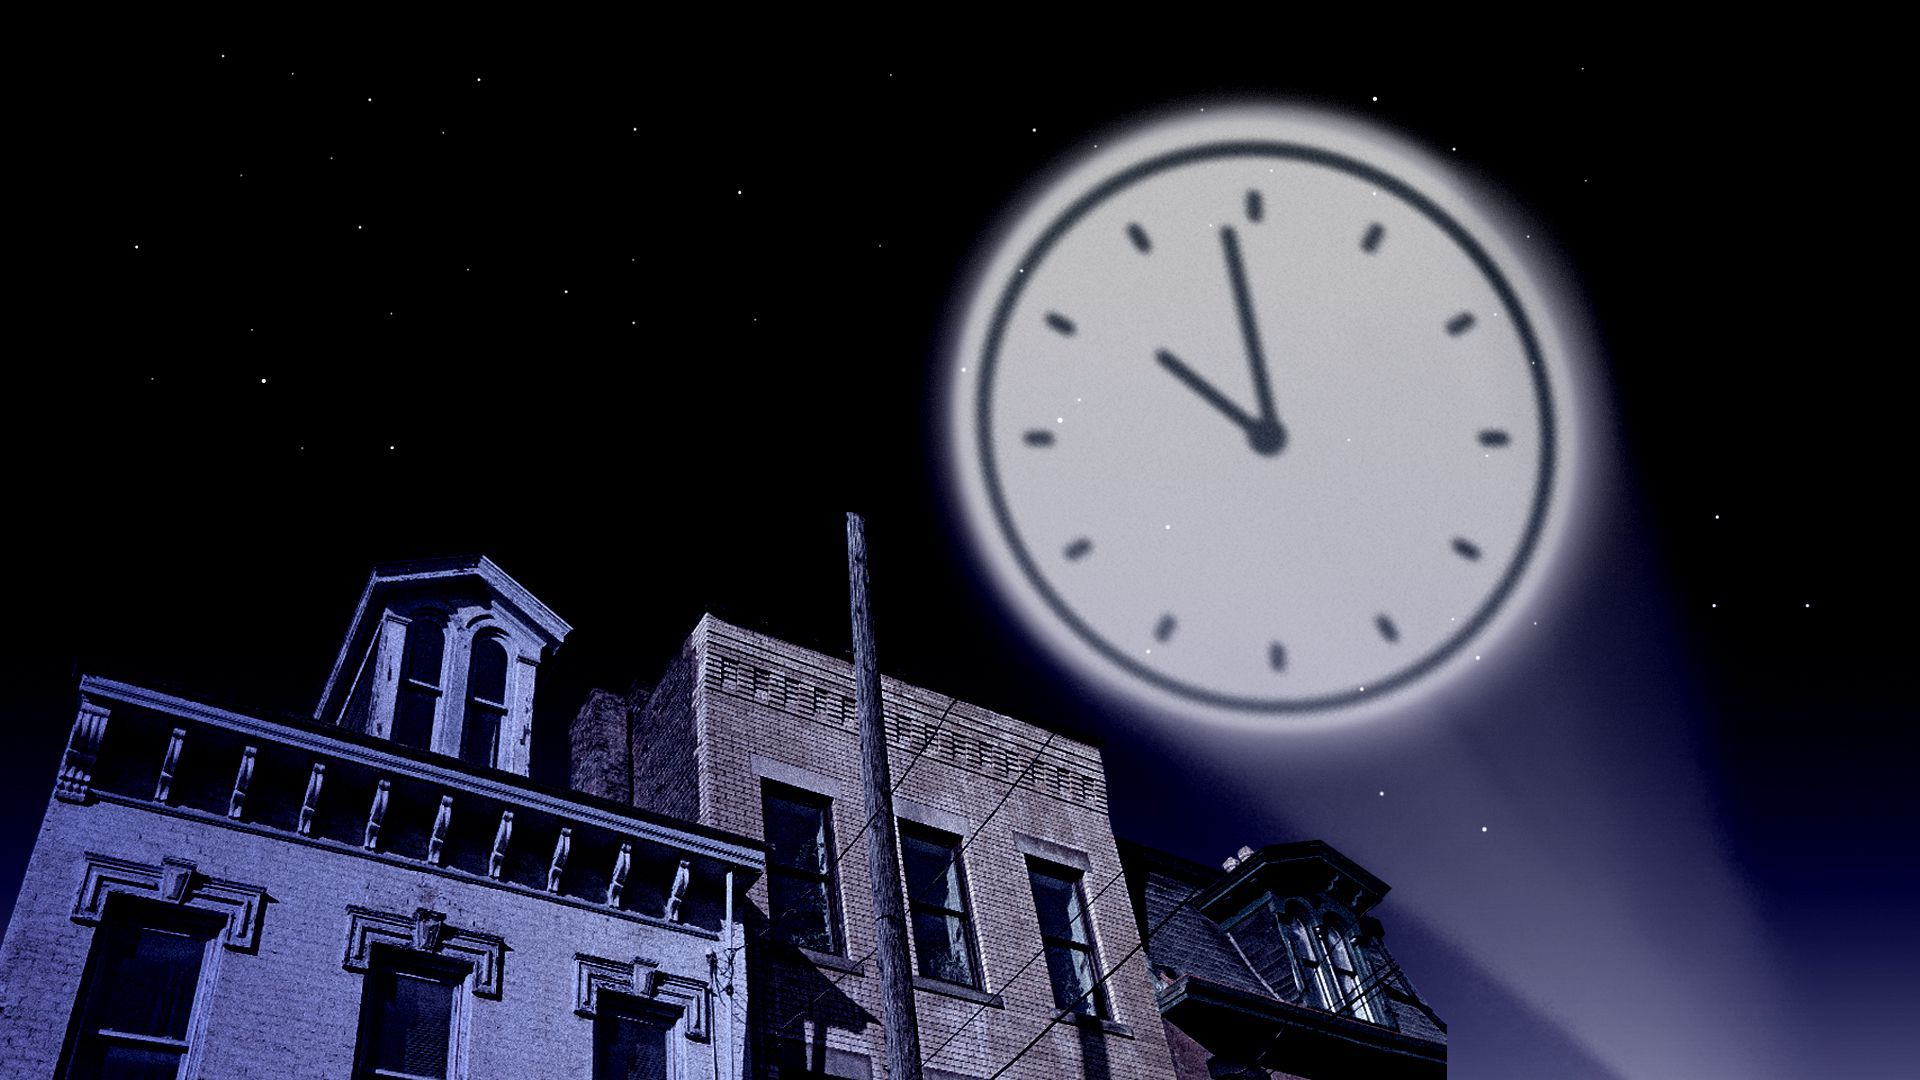 Illustration of brownstone buildings under a night sky lit with a spotlight depicting a clock